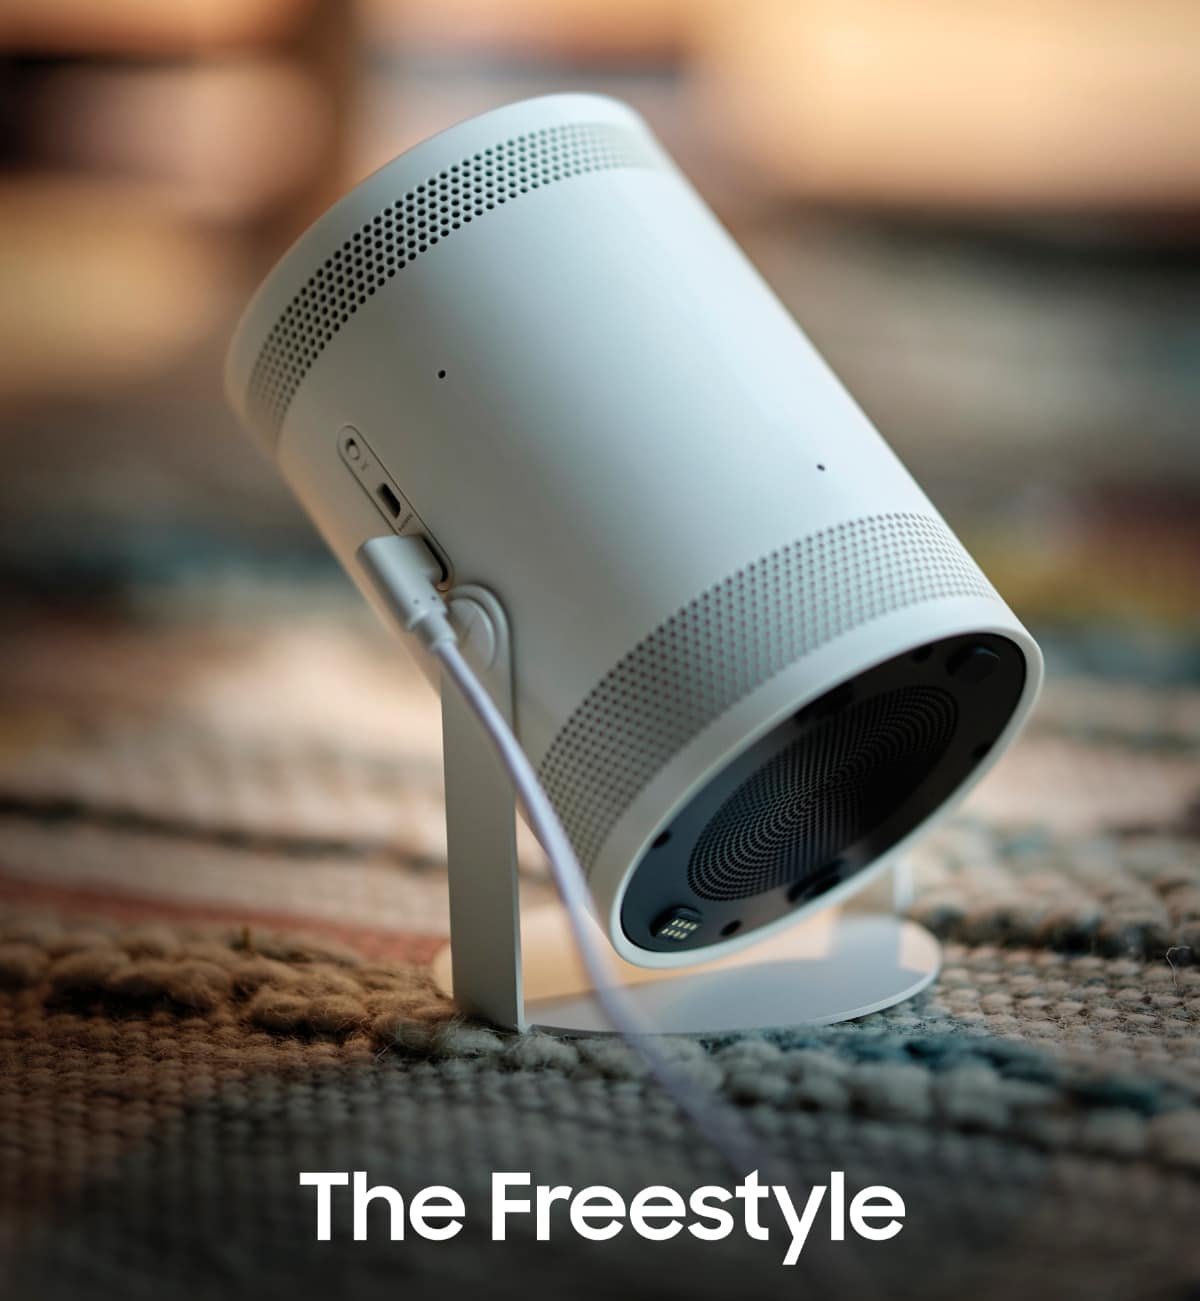 proyector Samsung The Freestyle lateral